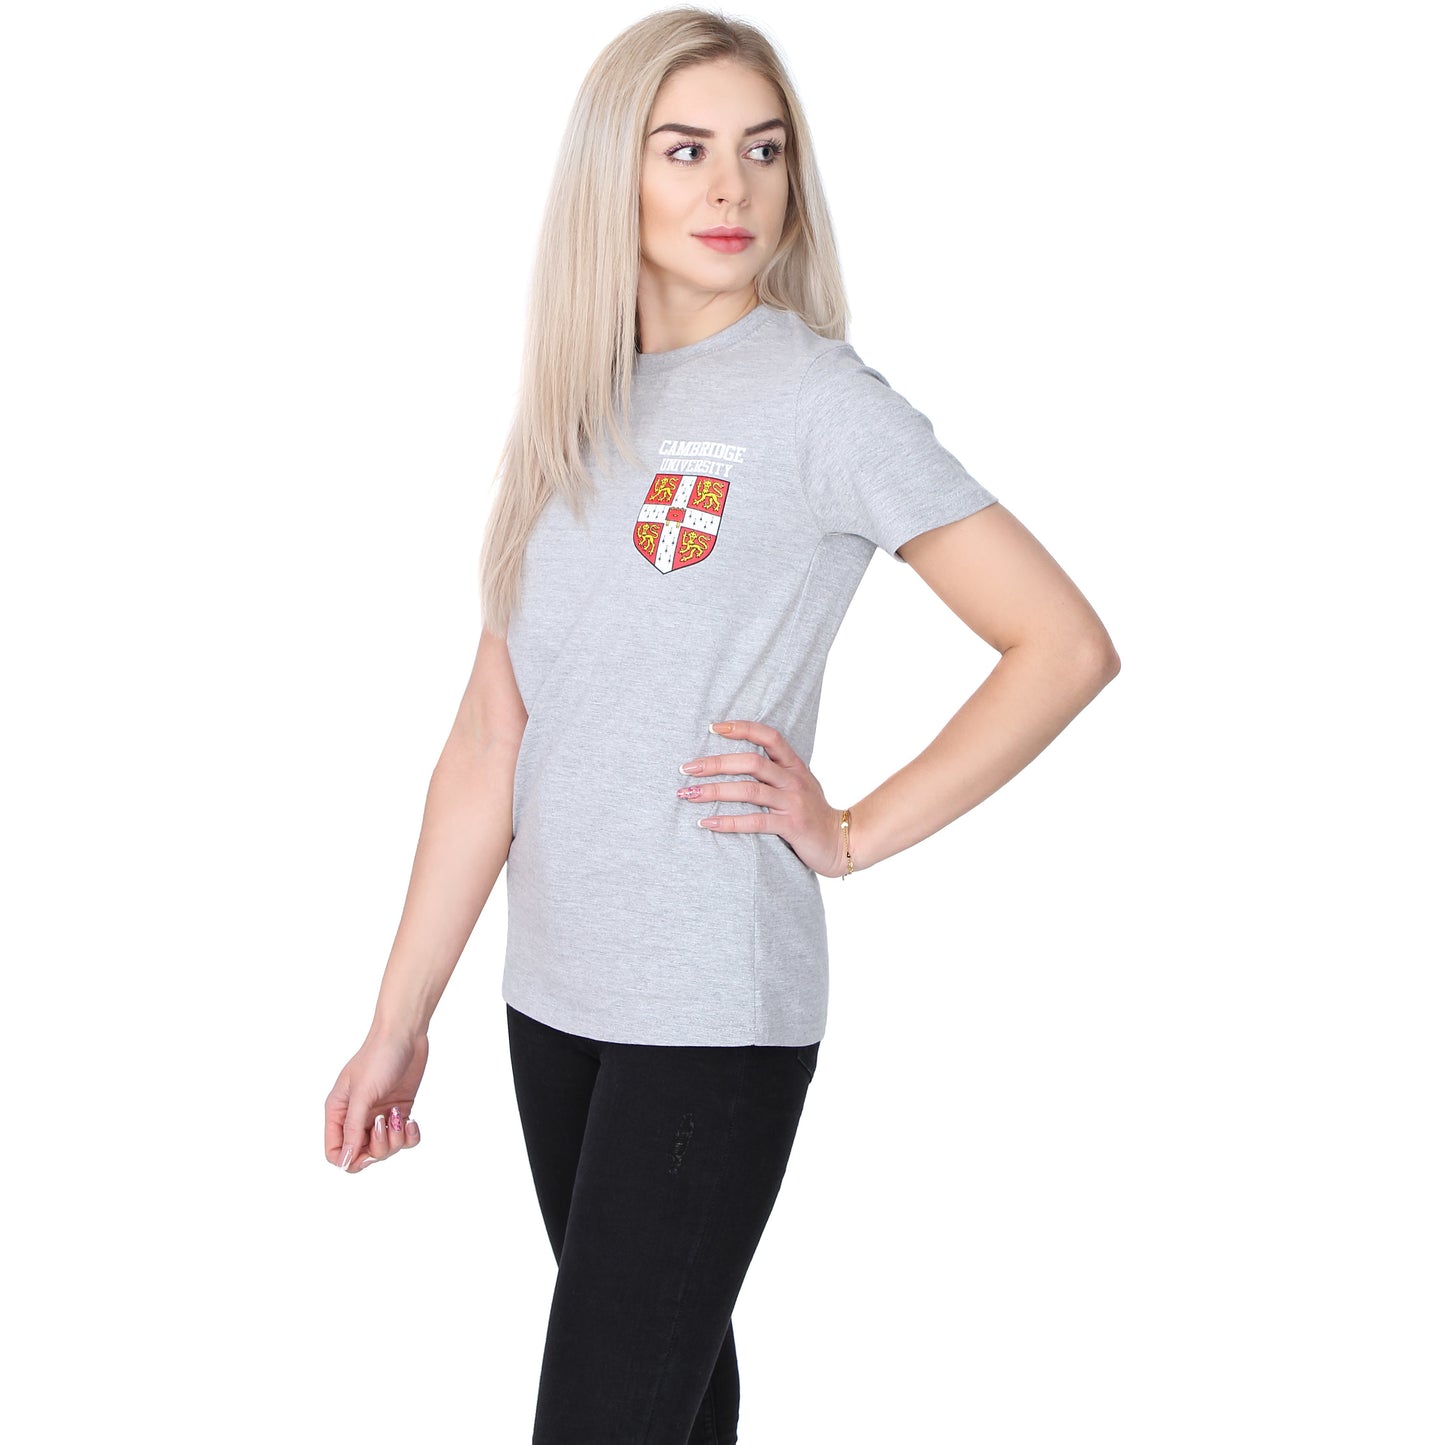 Female model wearing pale grey short sleeved T-shirt, with University of Cambridge shield in red, white, and yellow on the top left side. Brought to you by CuratingCambridge.com